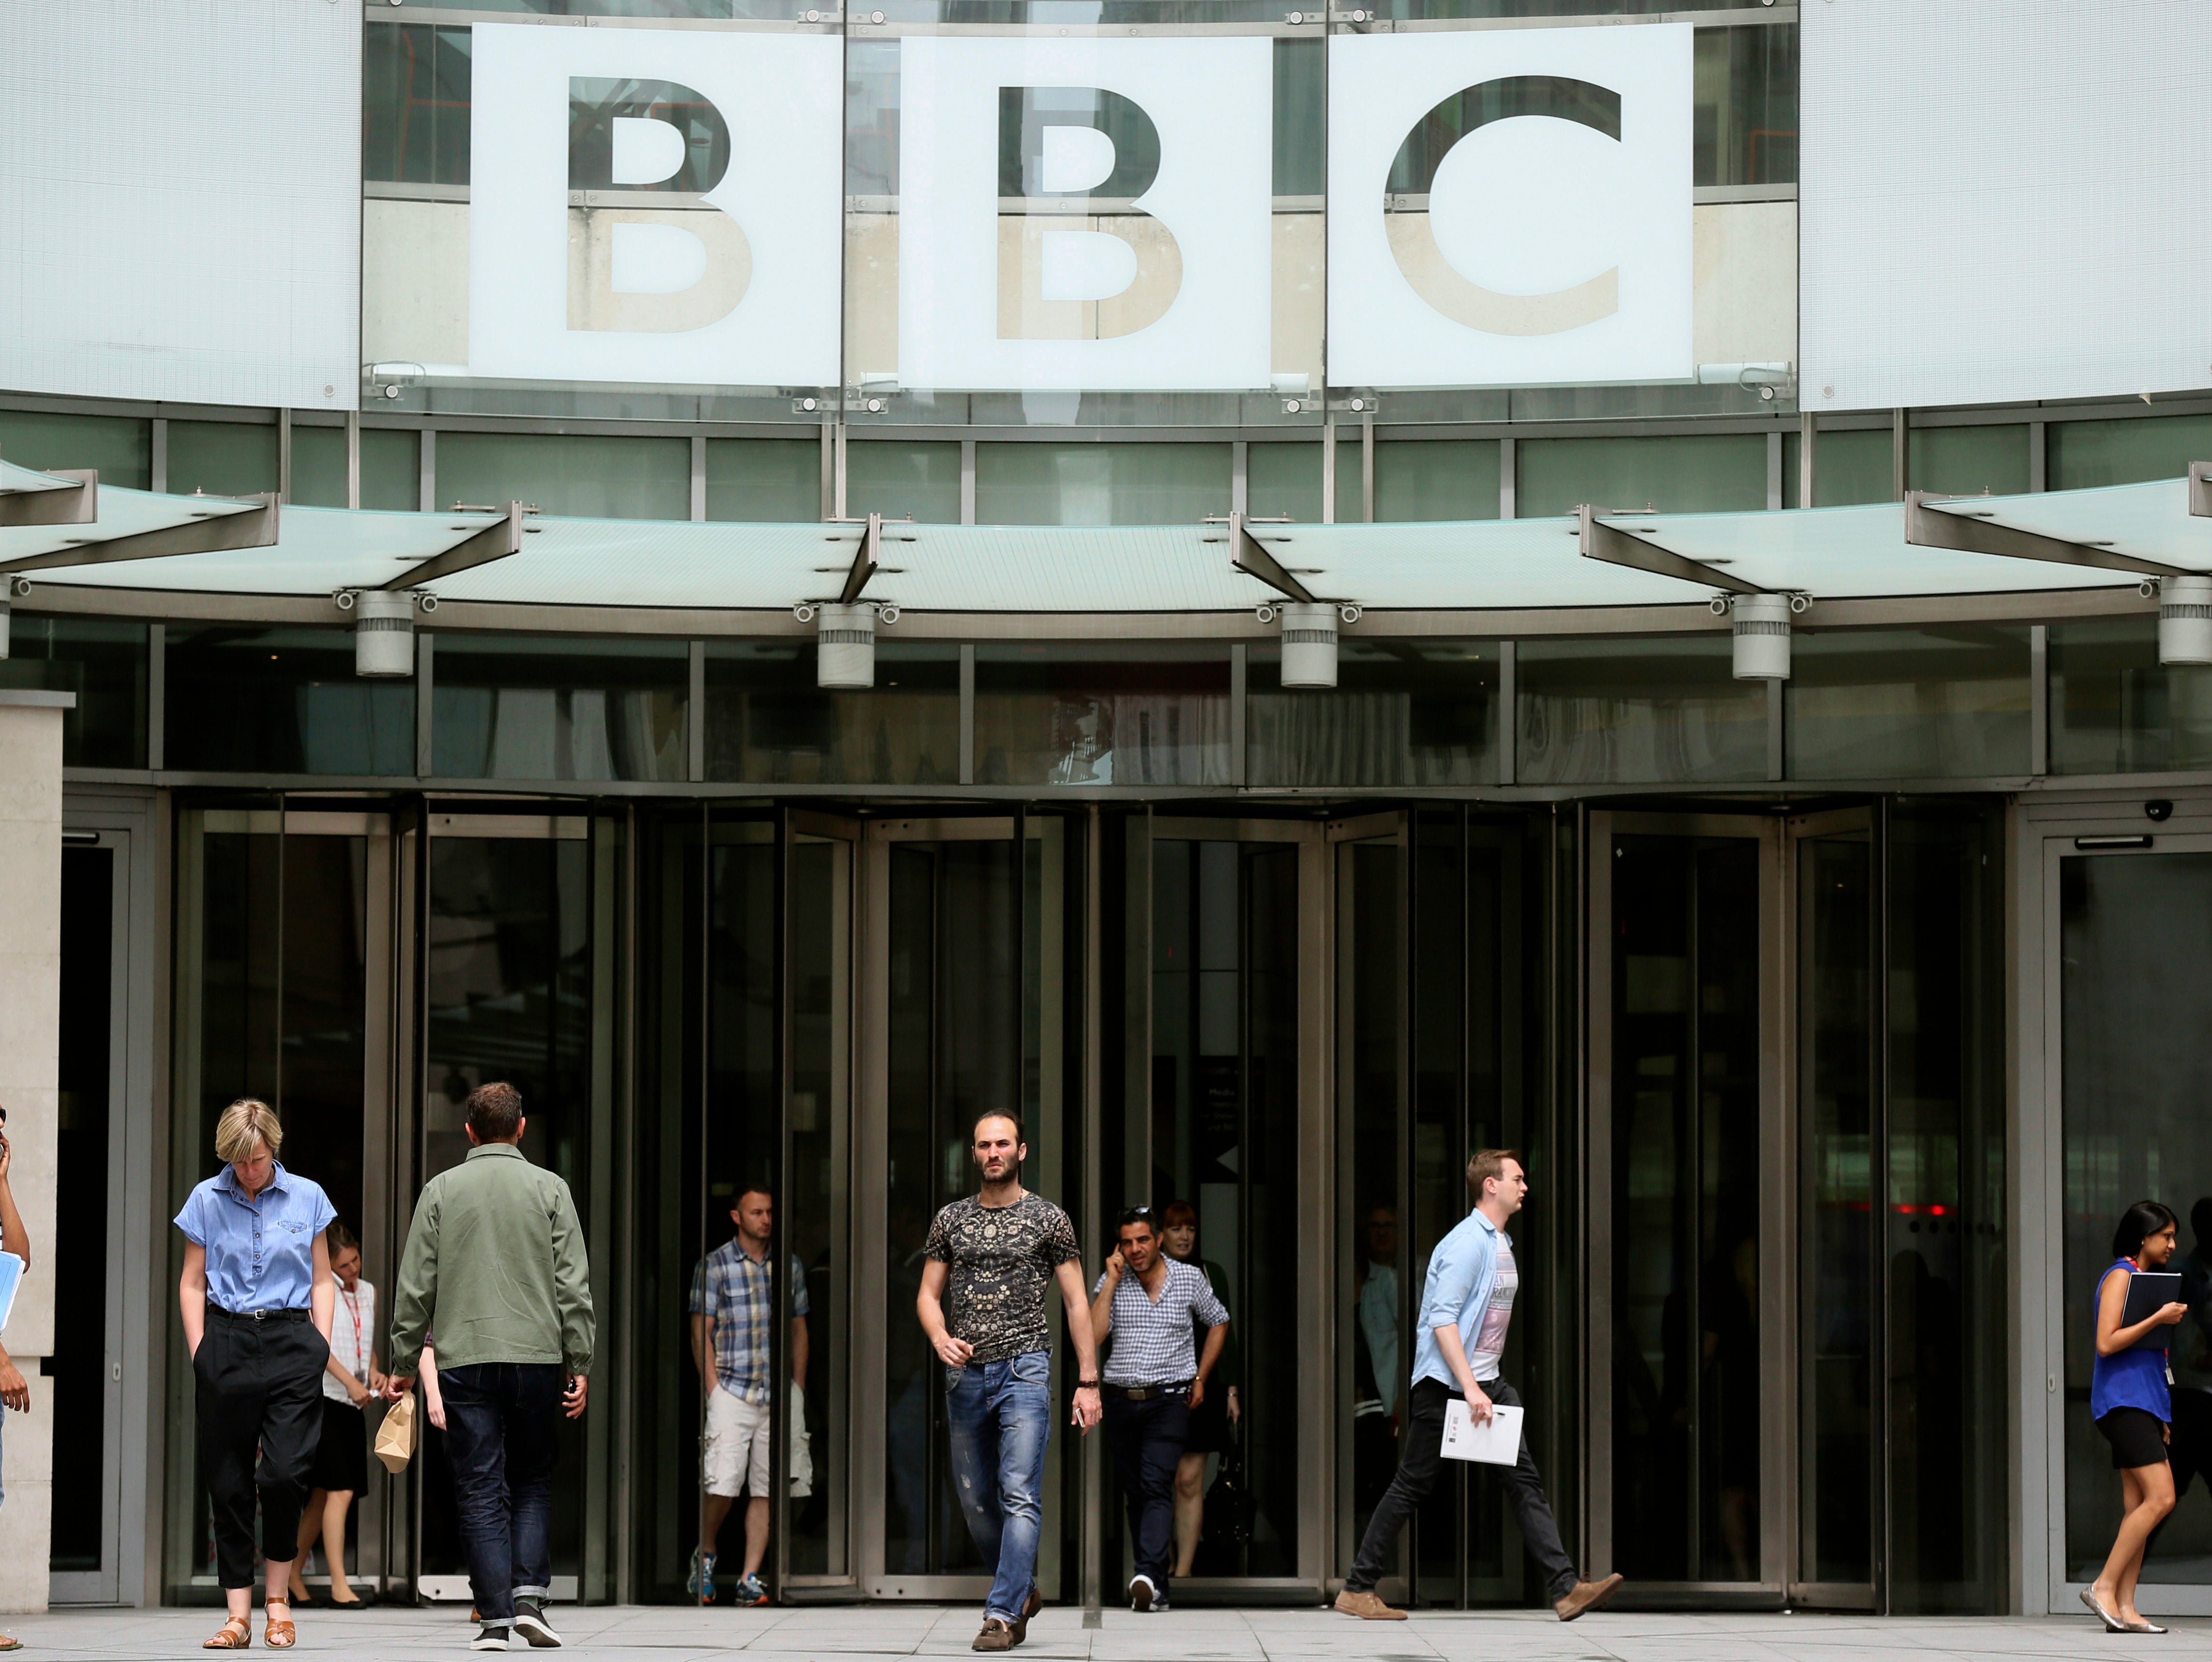 Press Gazette reader poll shows 47 per cent favour BBC scrapping licence fee